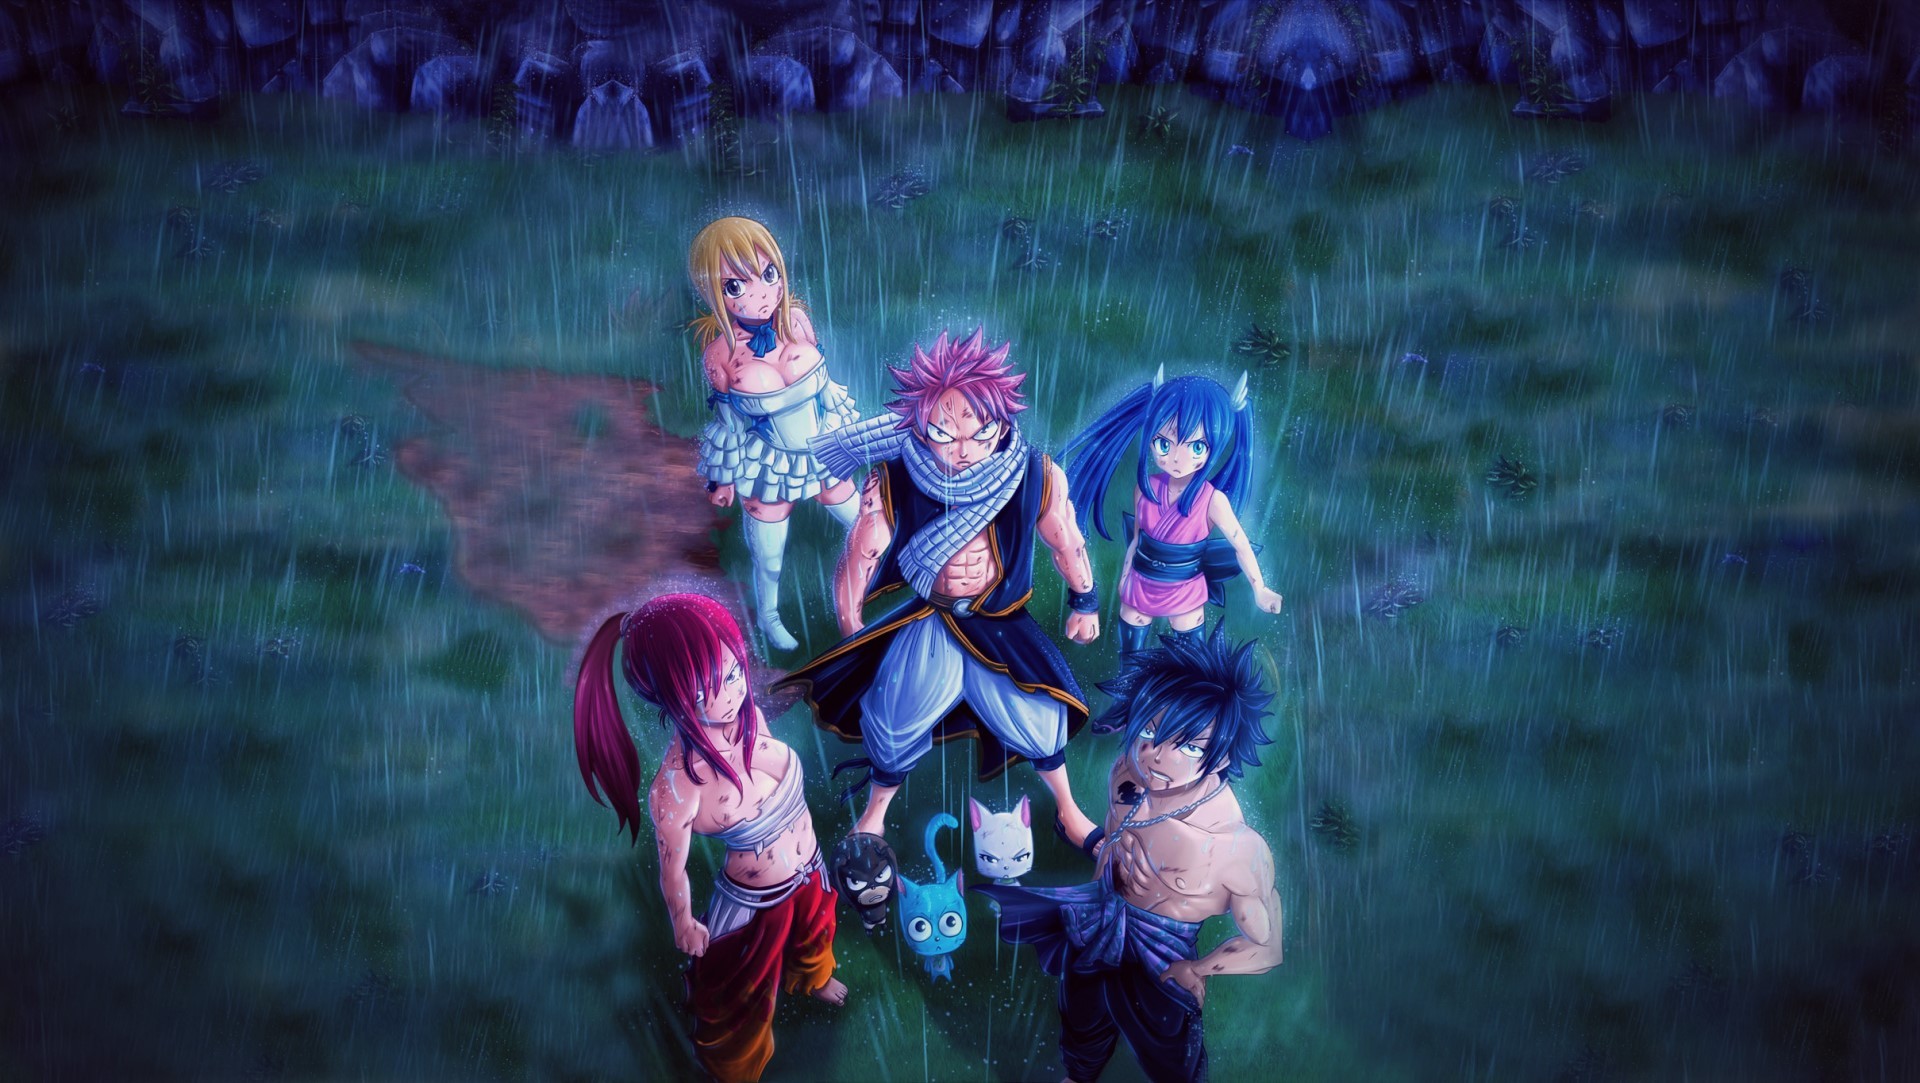 Anime Fairy Tail Wallpaper - Kolpaper - Awesome Free Hd Wallpapers